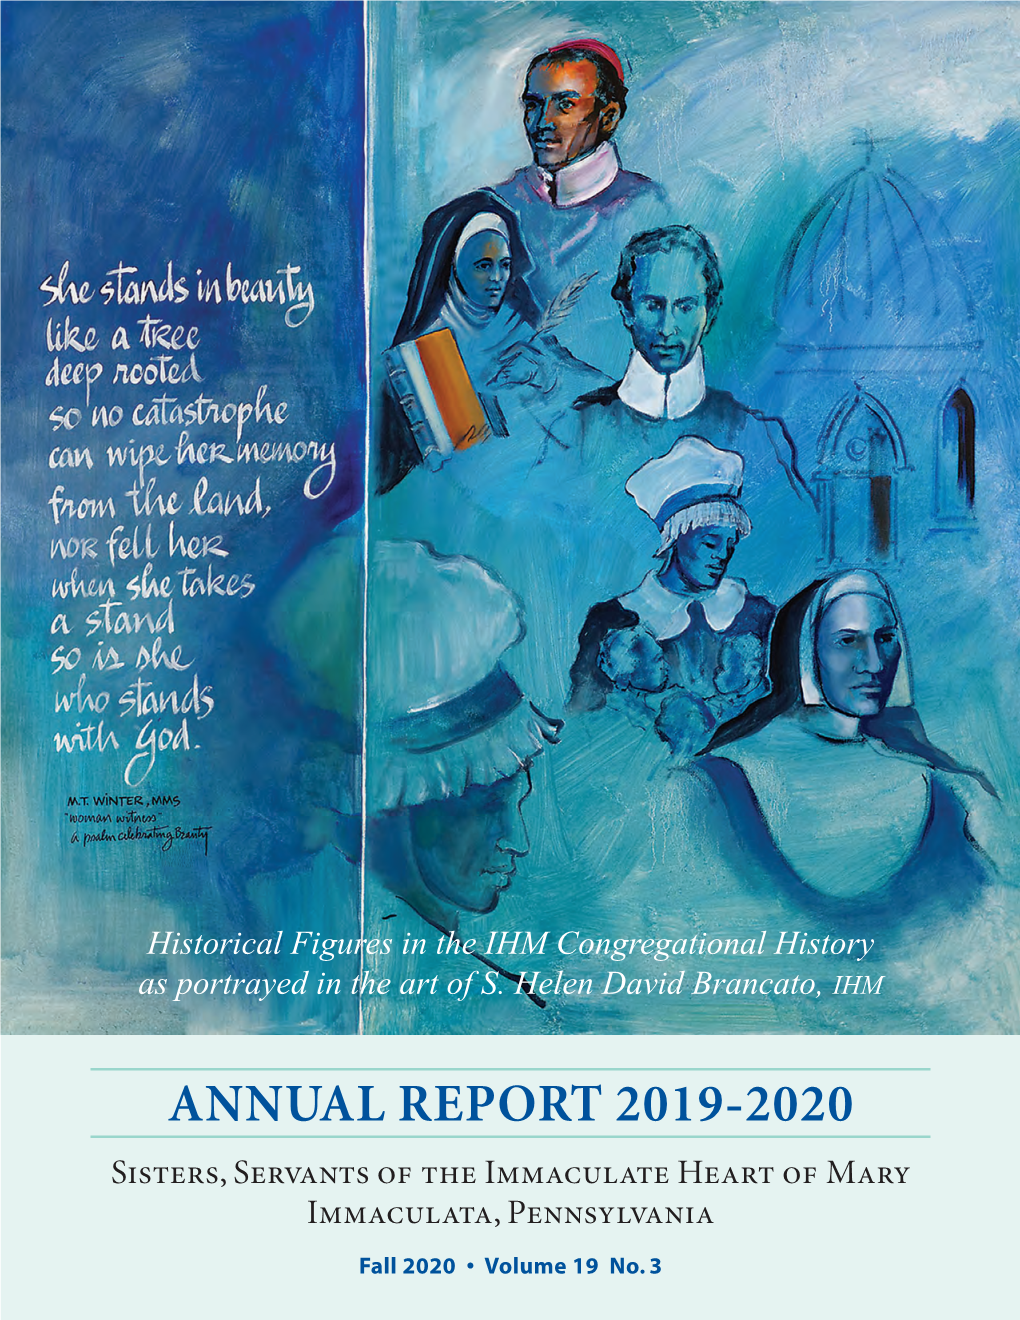 ANNUAL REPORT 2019-2020 Sisters, Servants of the Immaculate Heart of Mary Immaculata, Pennsylvania